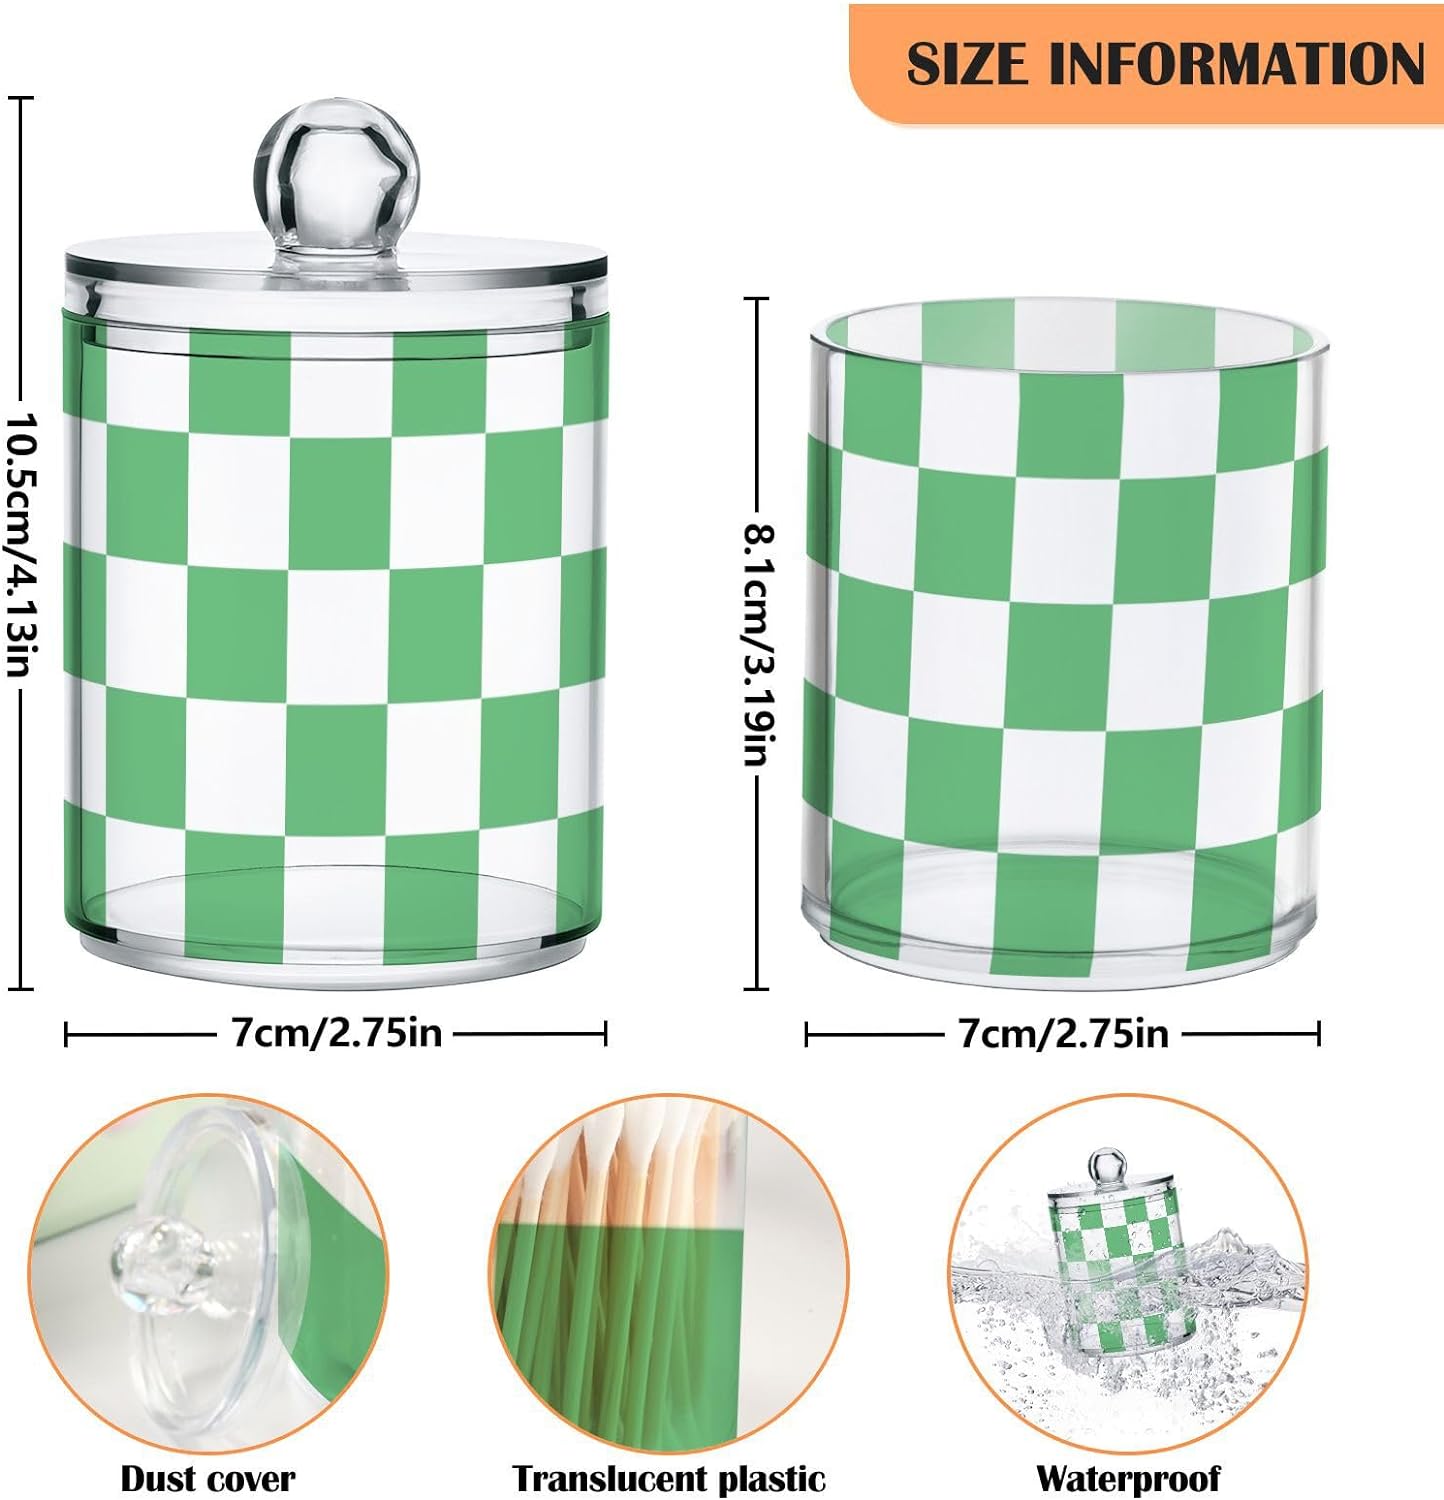 Lattice Green White Square Qtip Holder Dispenser Buffalo Checkered Plaid Bathroom Canister Storage Organization 4 Pack Clear Plastic Apothecary Jars with Lids Vanity Makeup Organizer For Cotton Swab